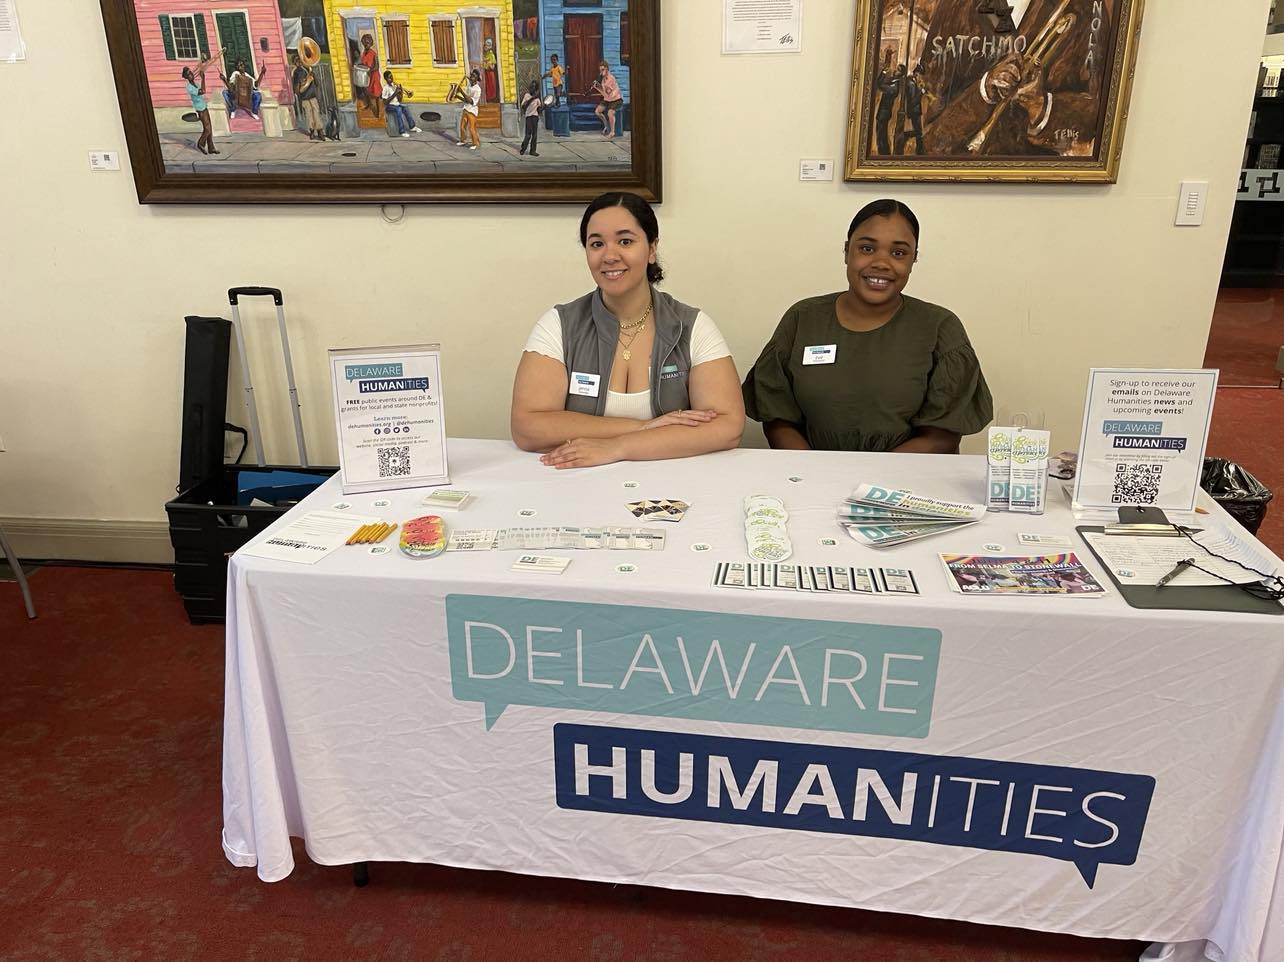 Jenna Greenlee (left) and Zoe Yearwood (right) of Delaware Humanities set up table at "An Evening With Actress Lynn Whitfield" at the Wilmington Public Library. Photo Credit: Mark Tyler